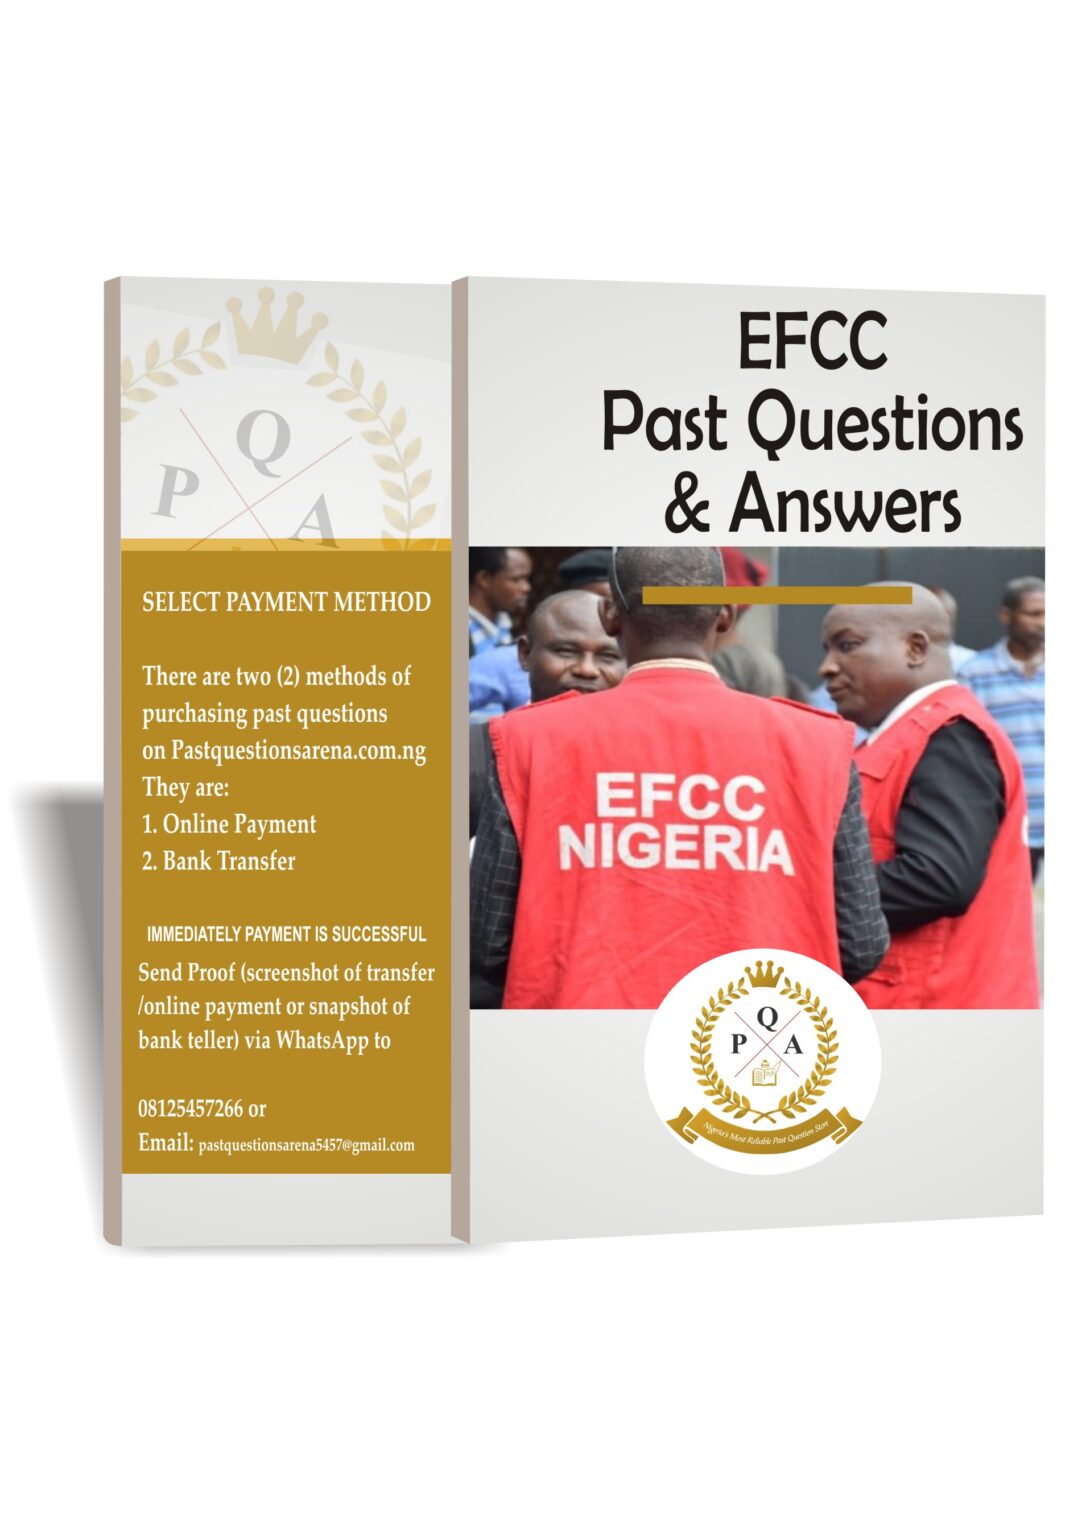 eco-bank-aptitude-test-past-questions-and-answers-up-to-date